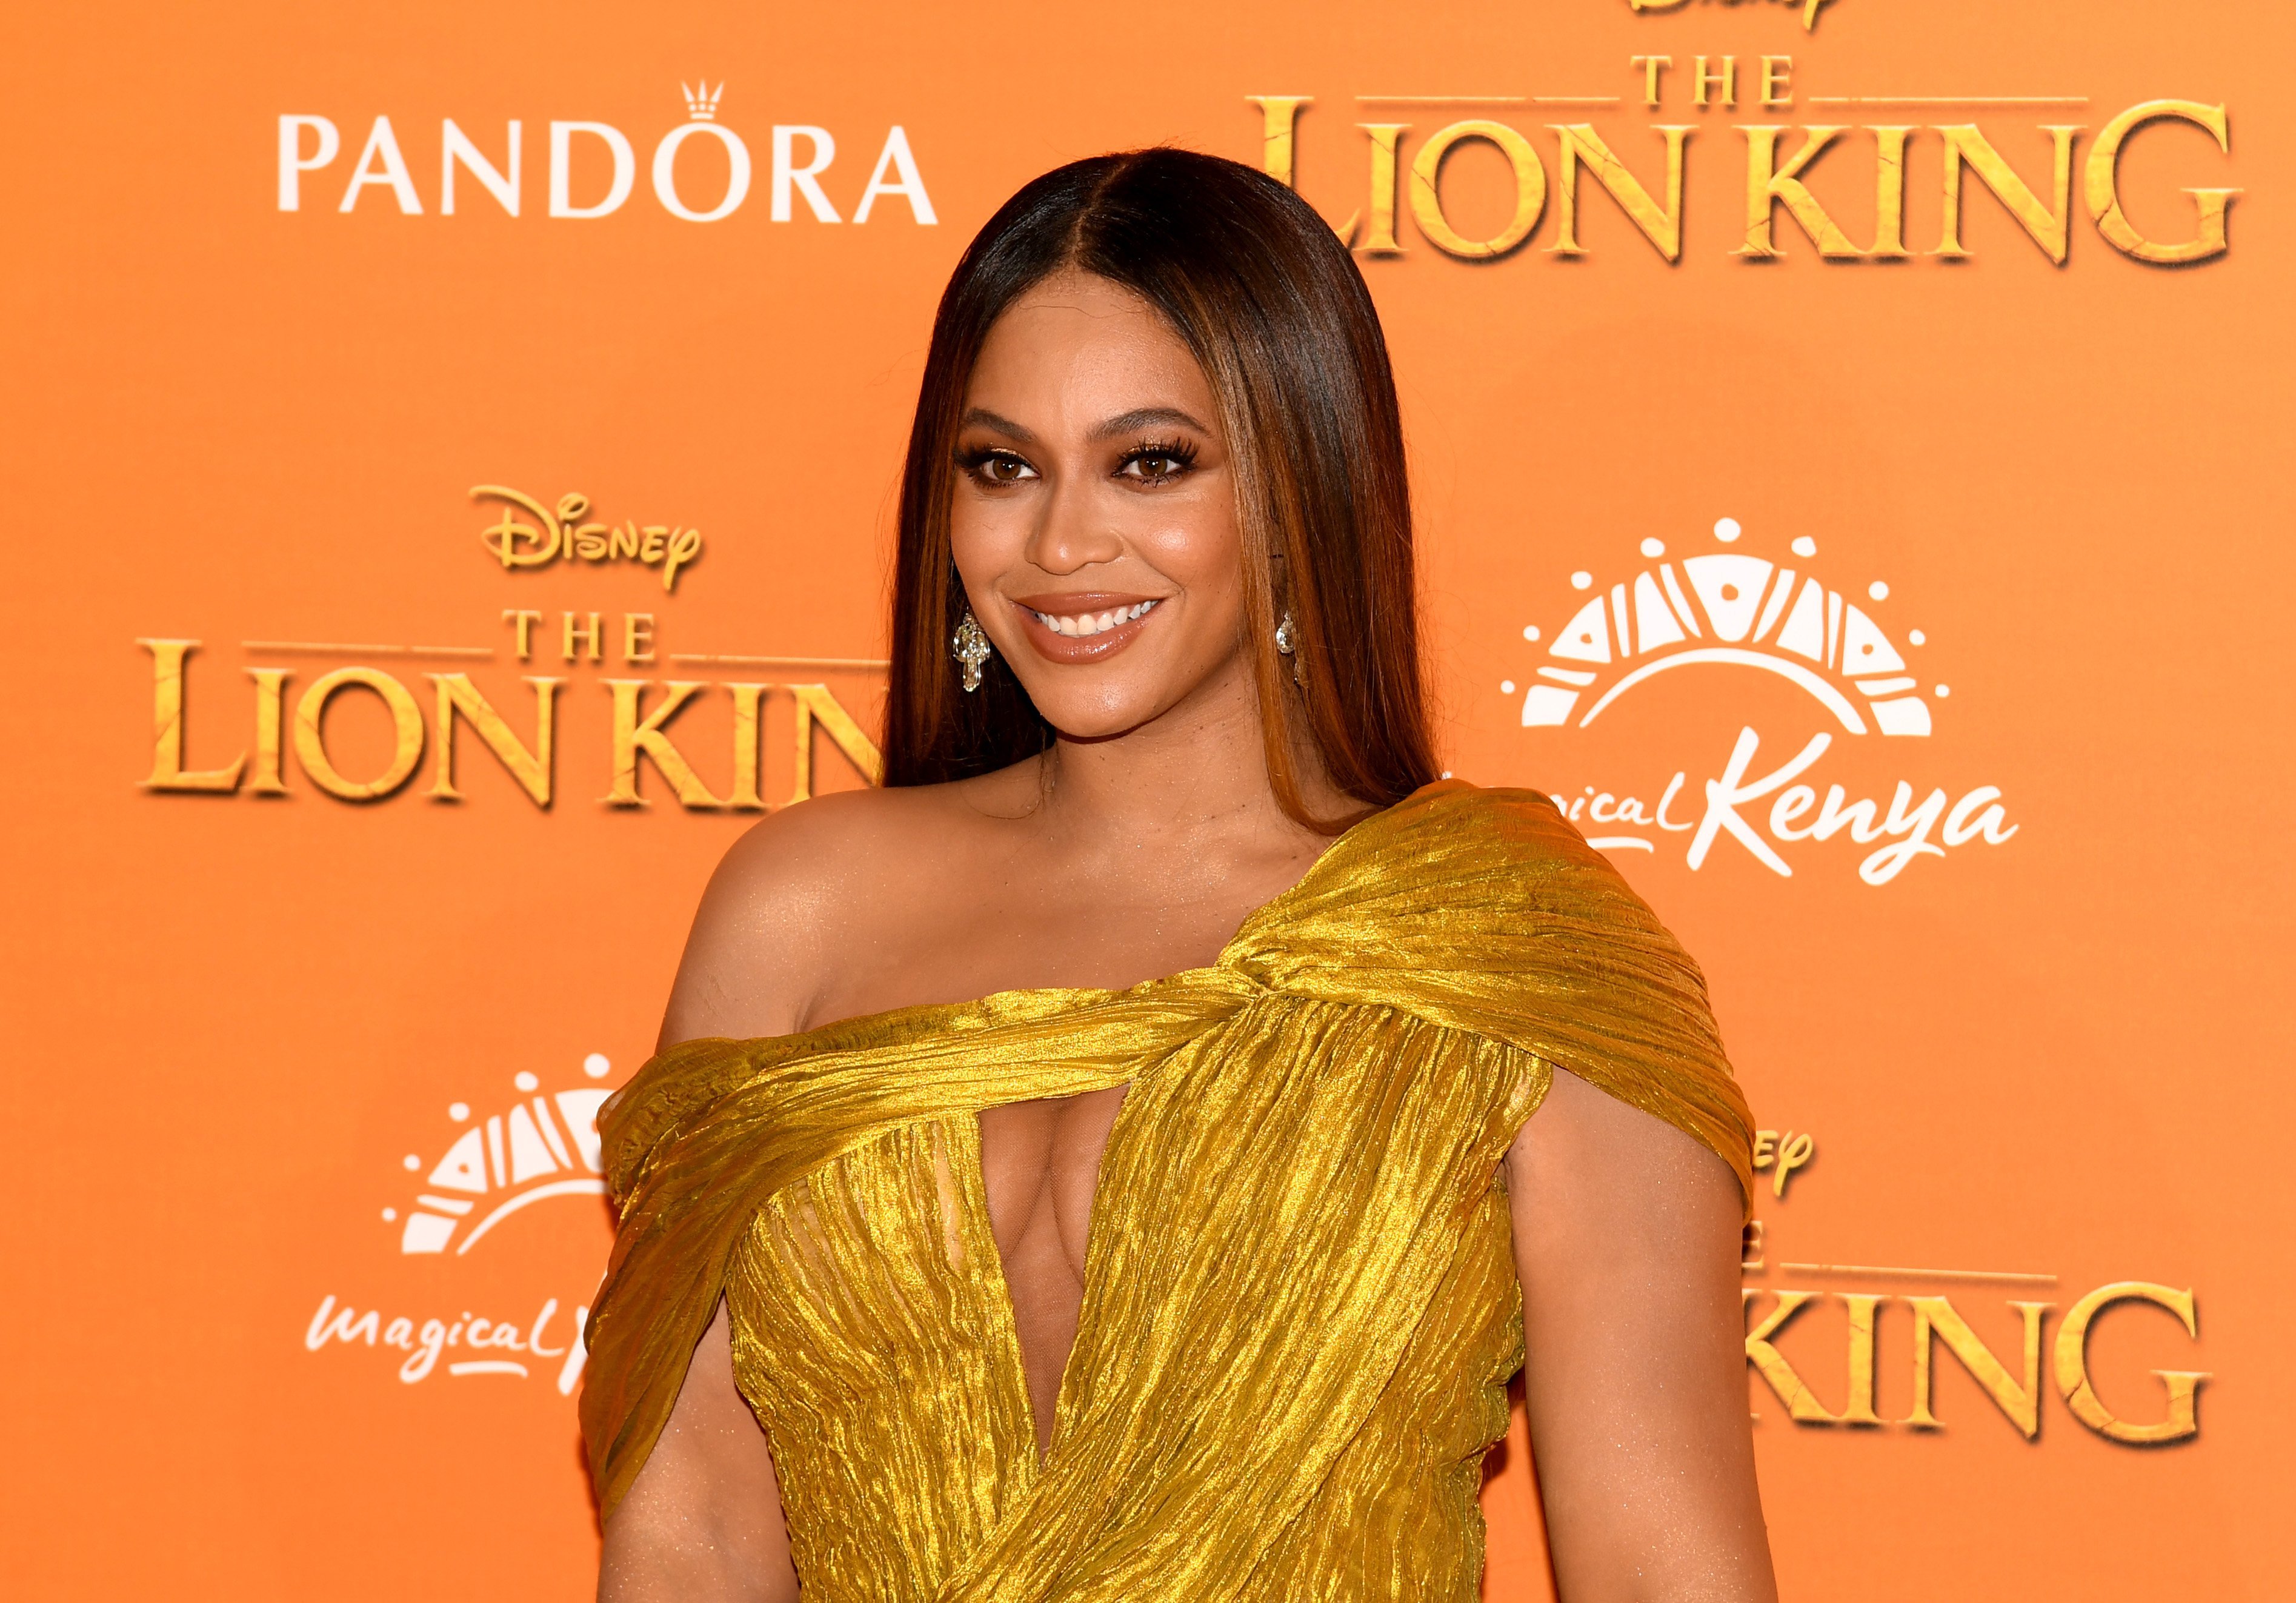 Beyonce at the European premiere of "The Lion King" in July 2019. | Photo: Getty Images